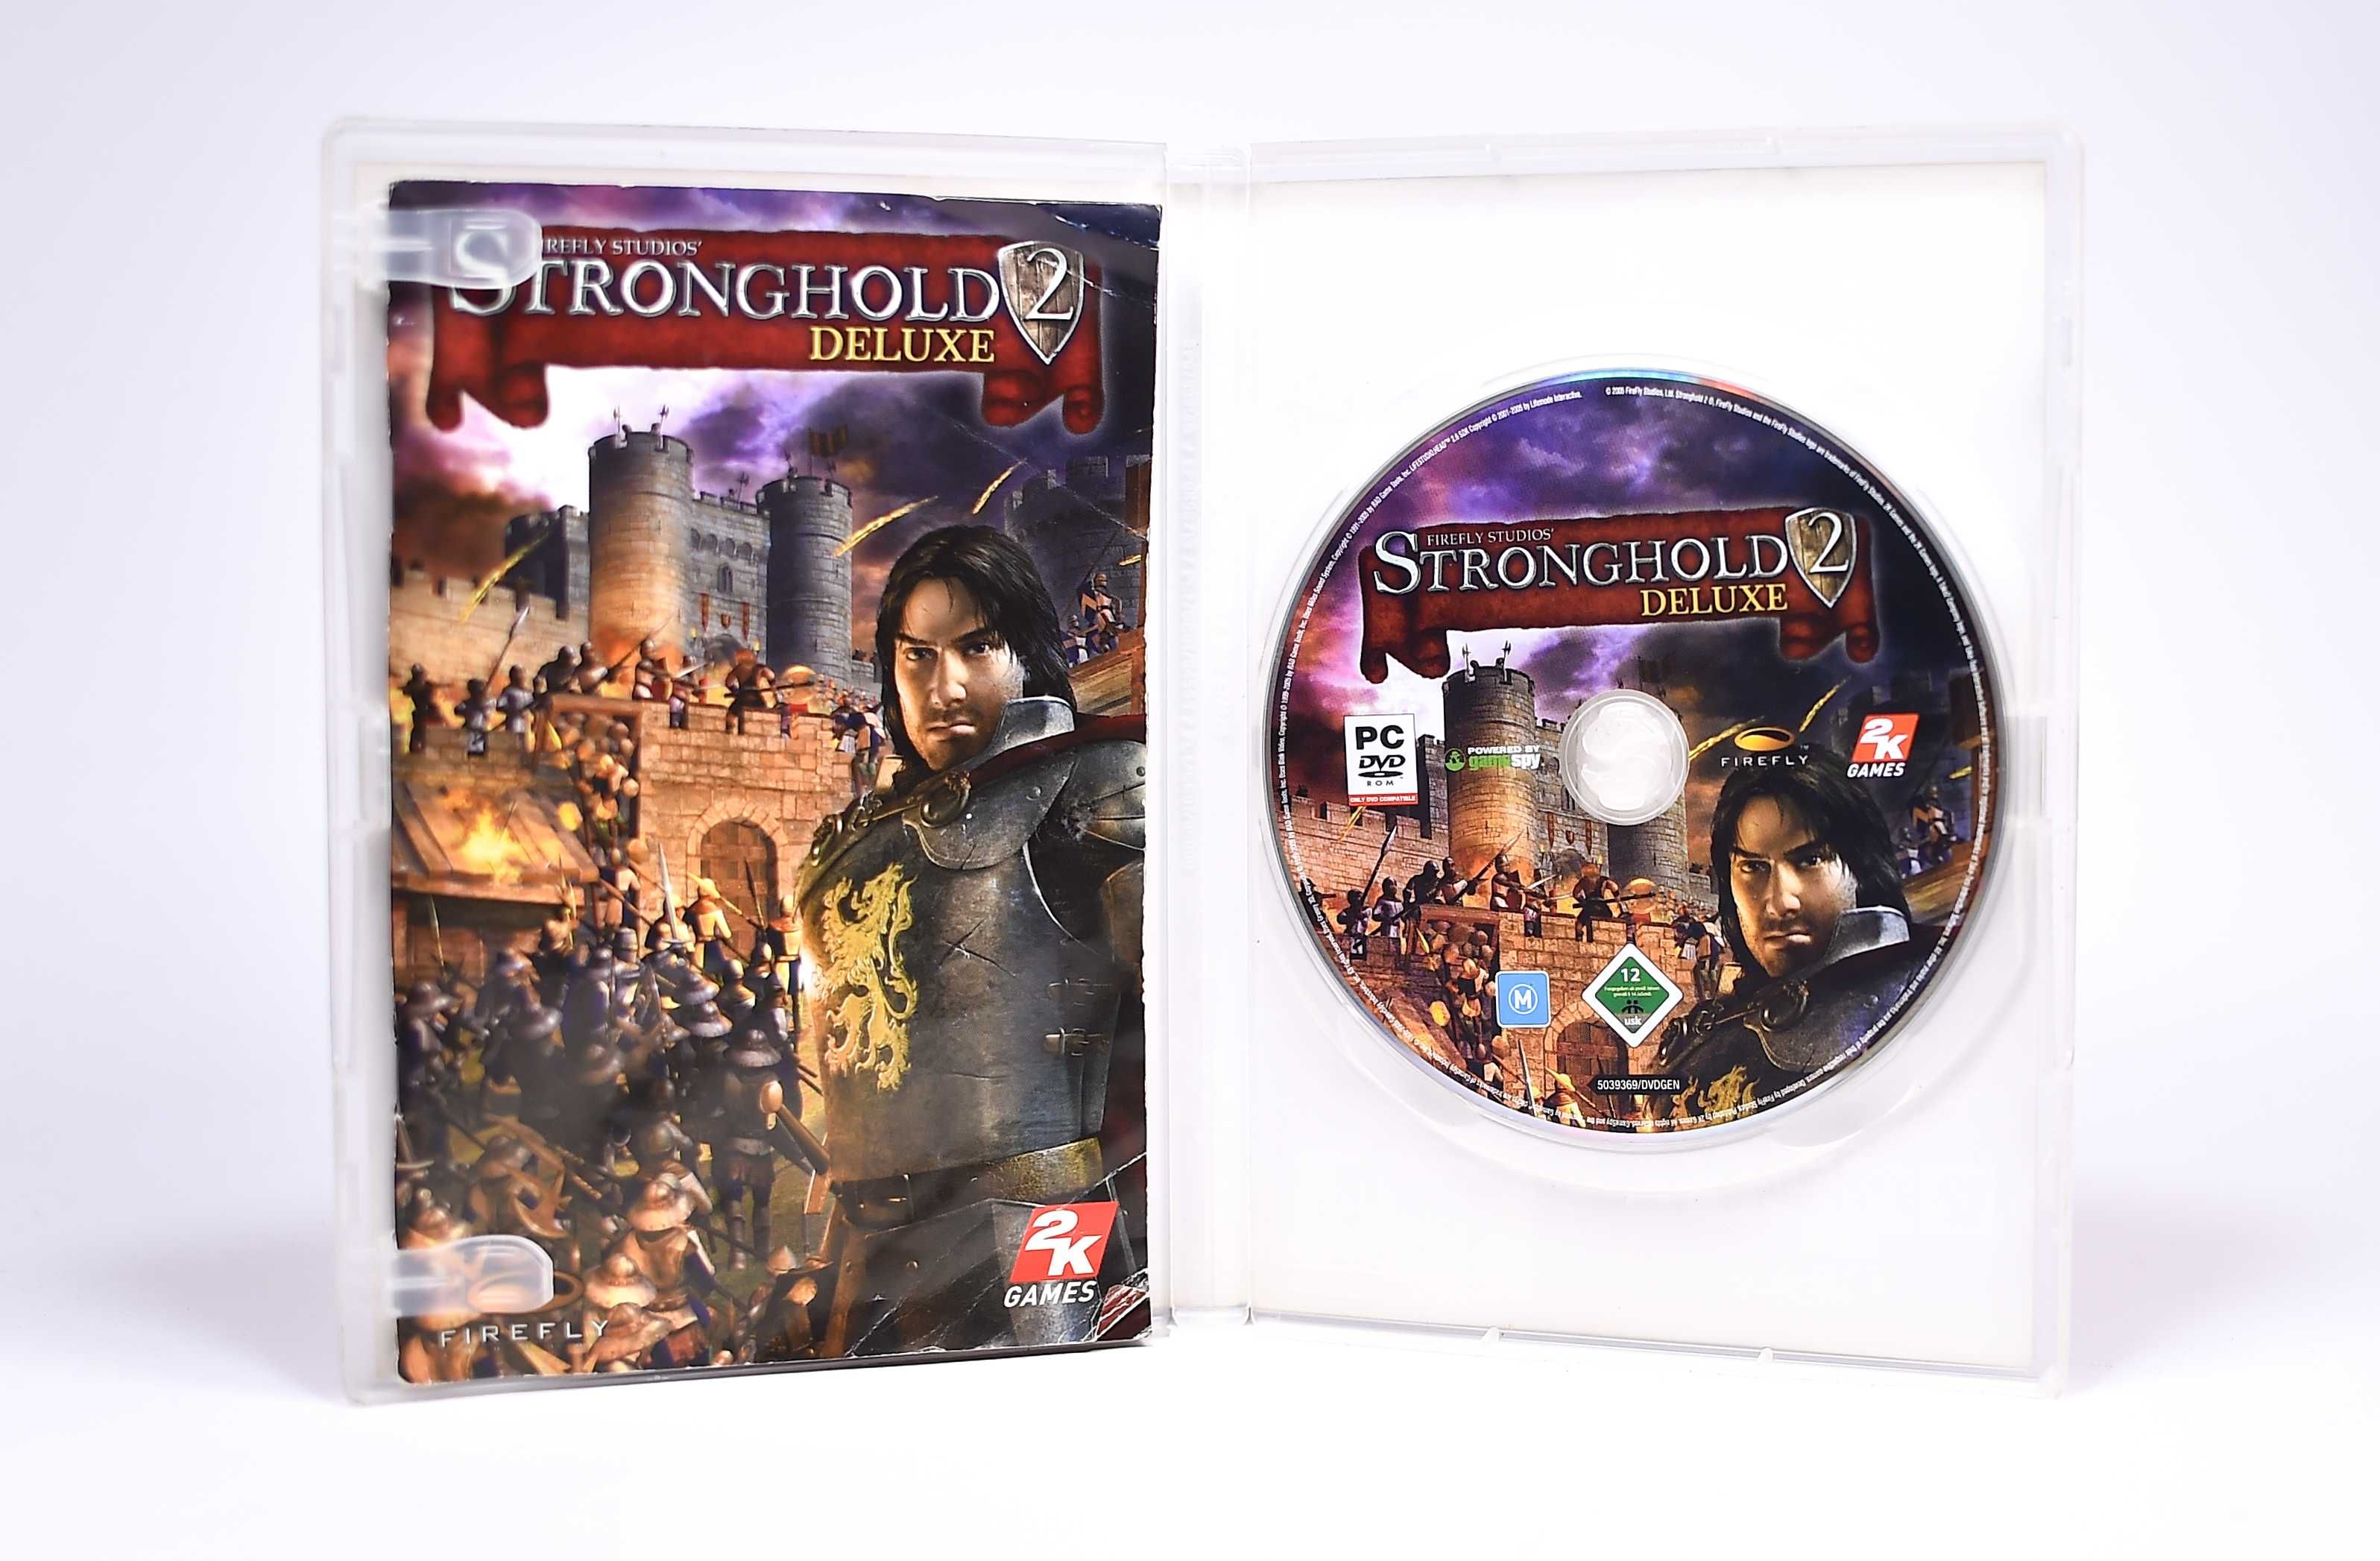 PC # The Stronghold 2 Deluxe